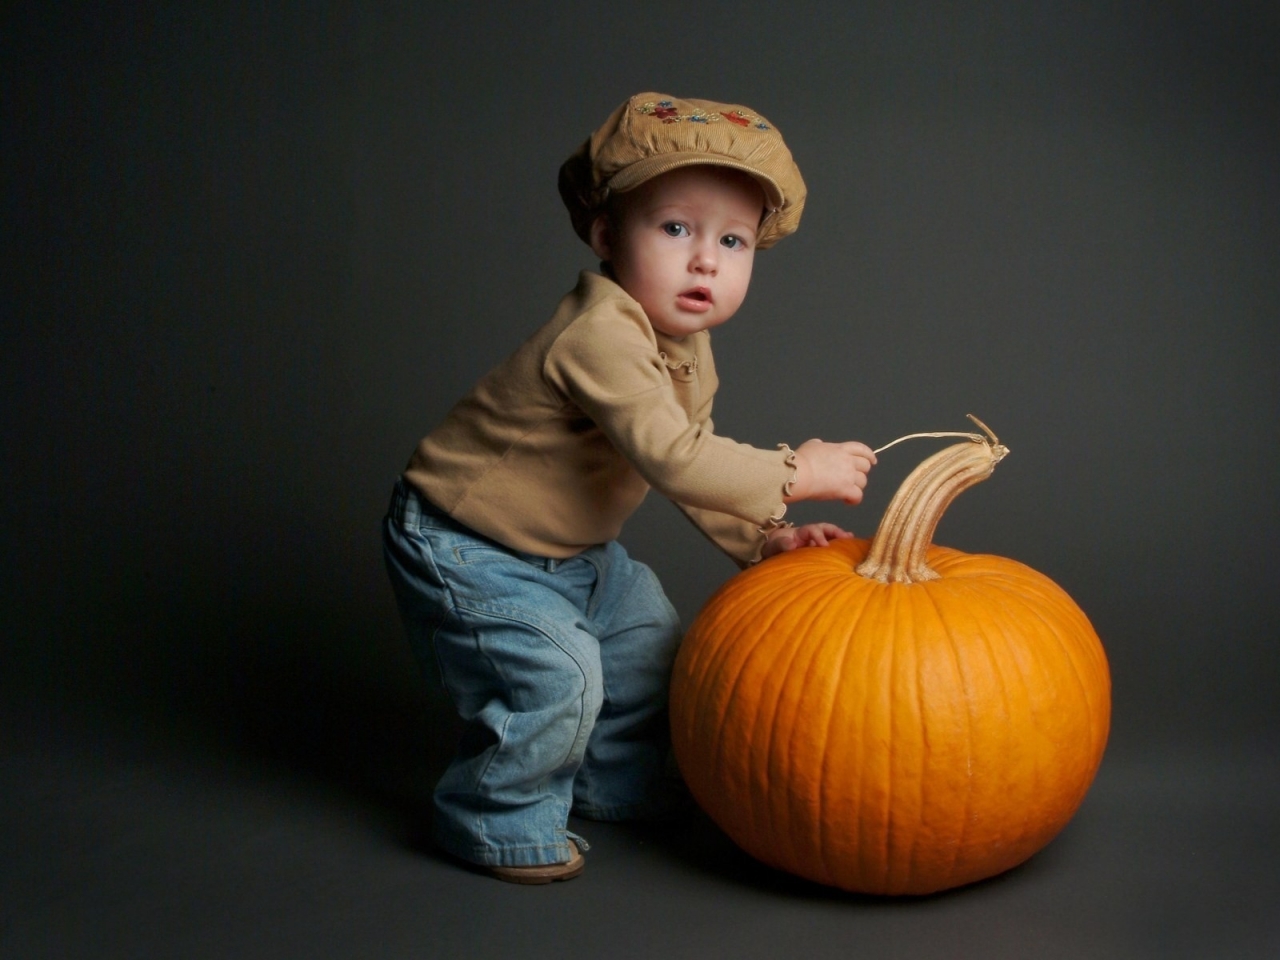 The Boy with Pumpkin for 1280 x 960 resolution